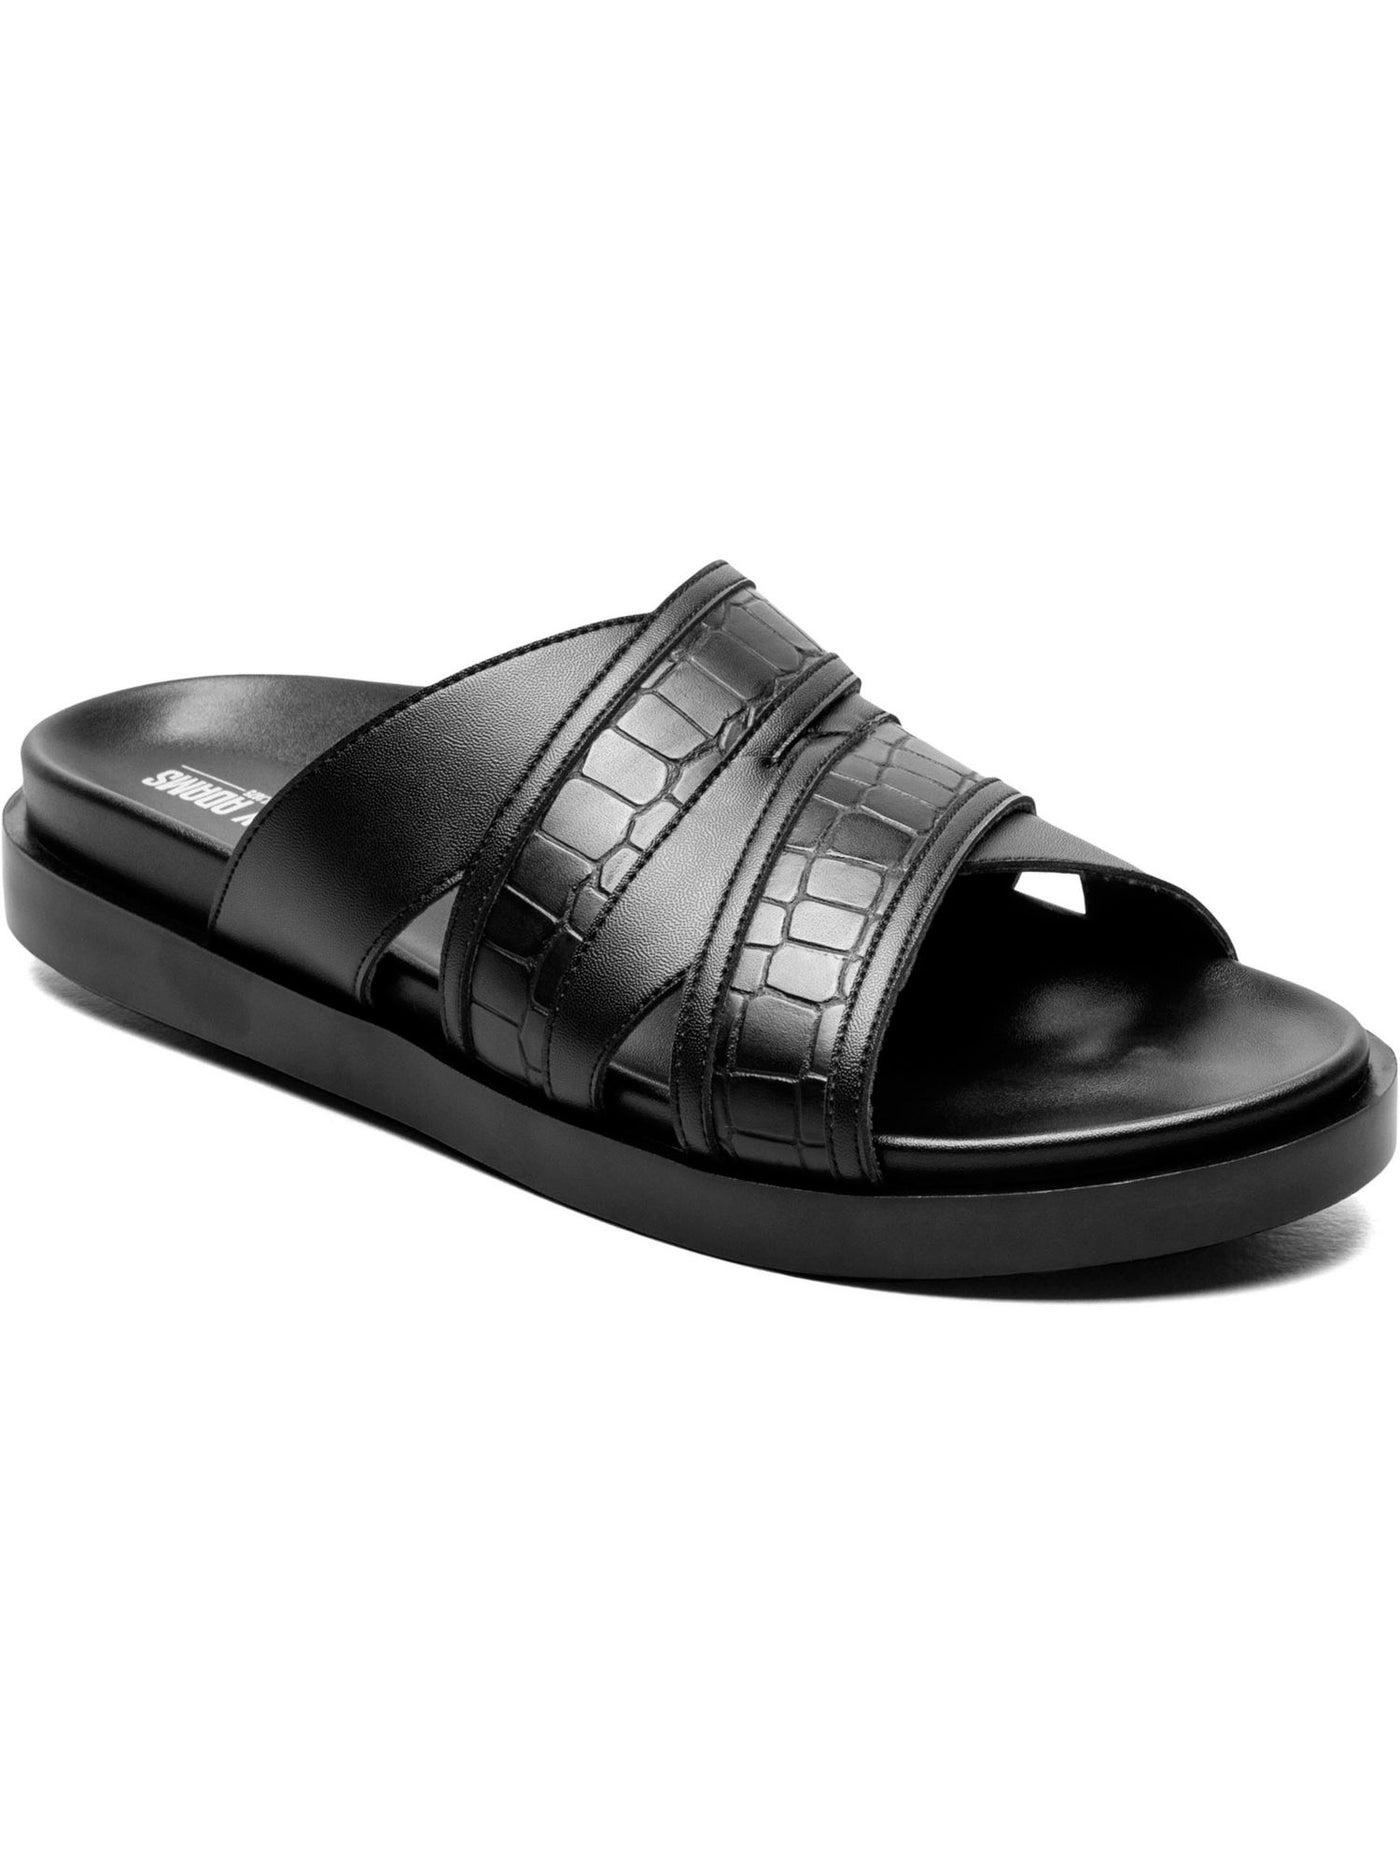 STACY ADAMS Mens Black Mixed Media Cushioned Mondo Open Toe Slip On Slide Sandals Shoes 12 M